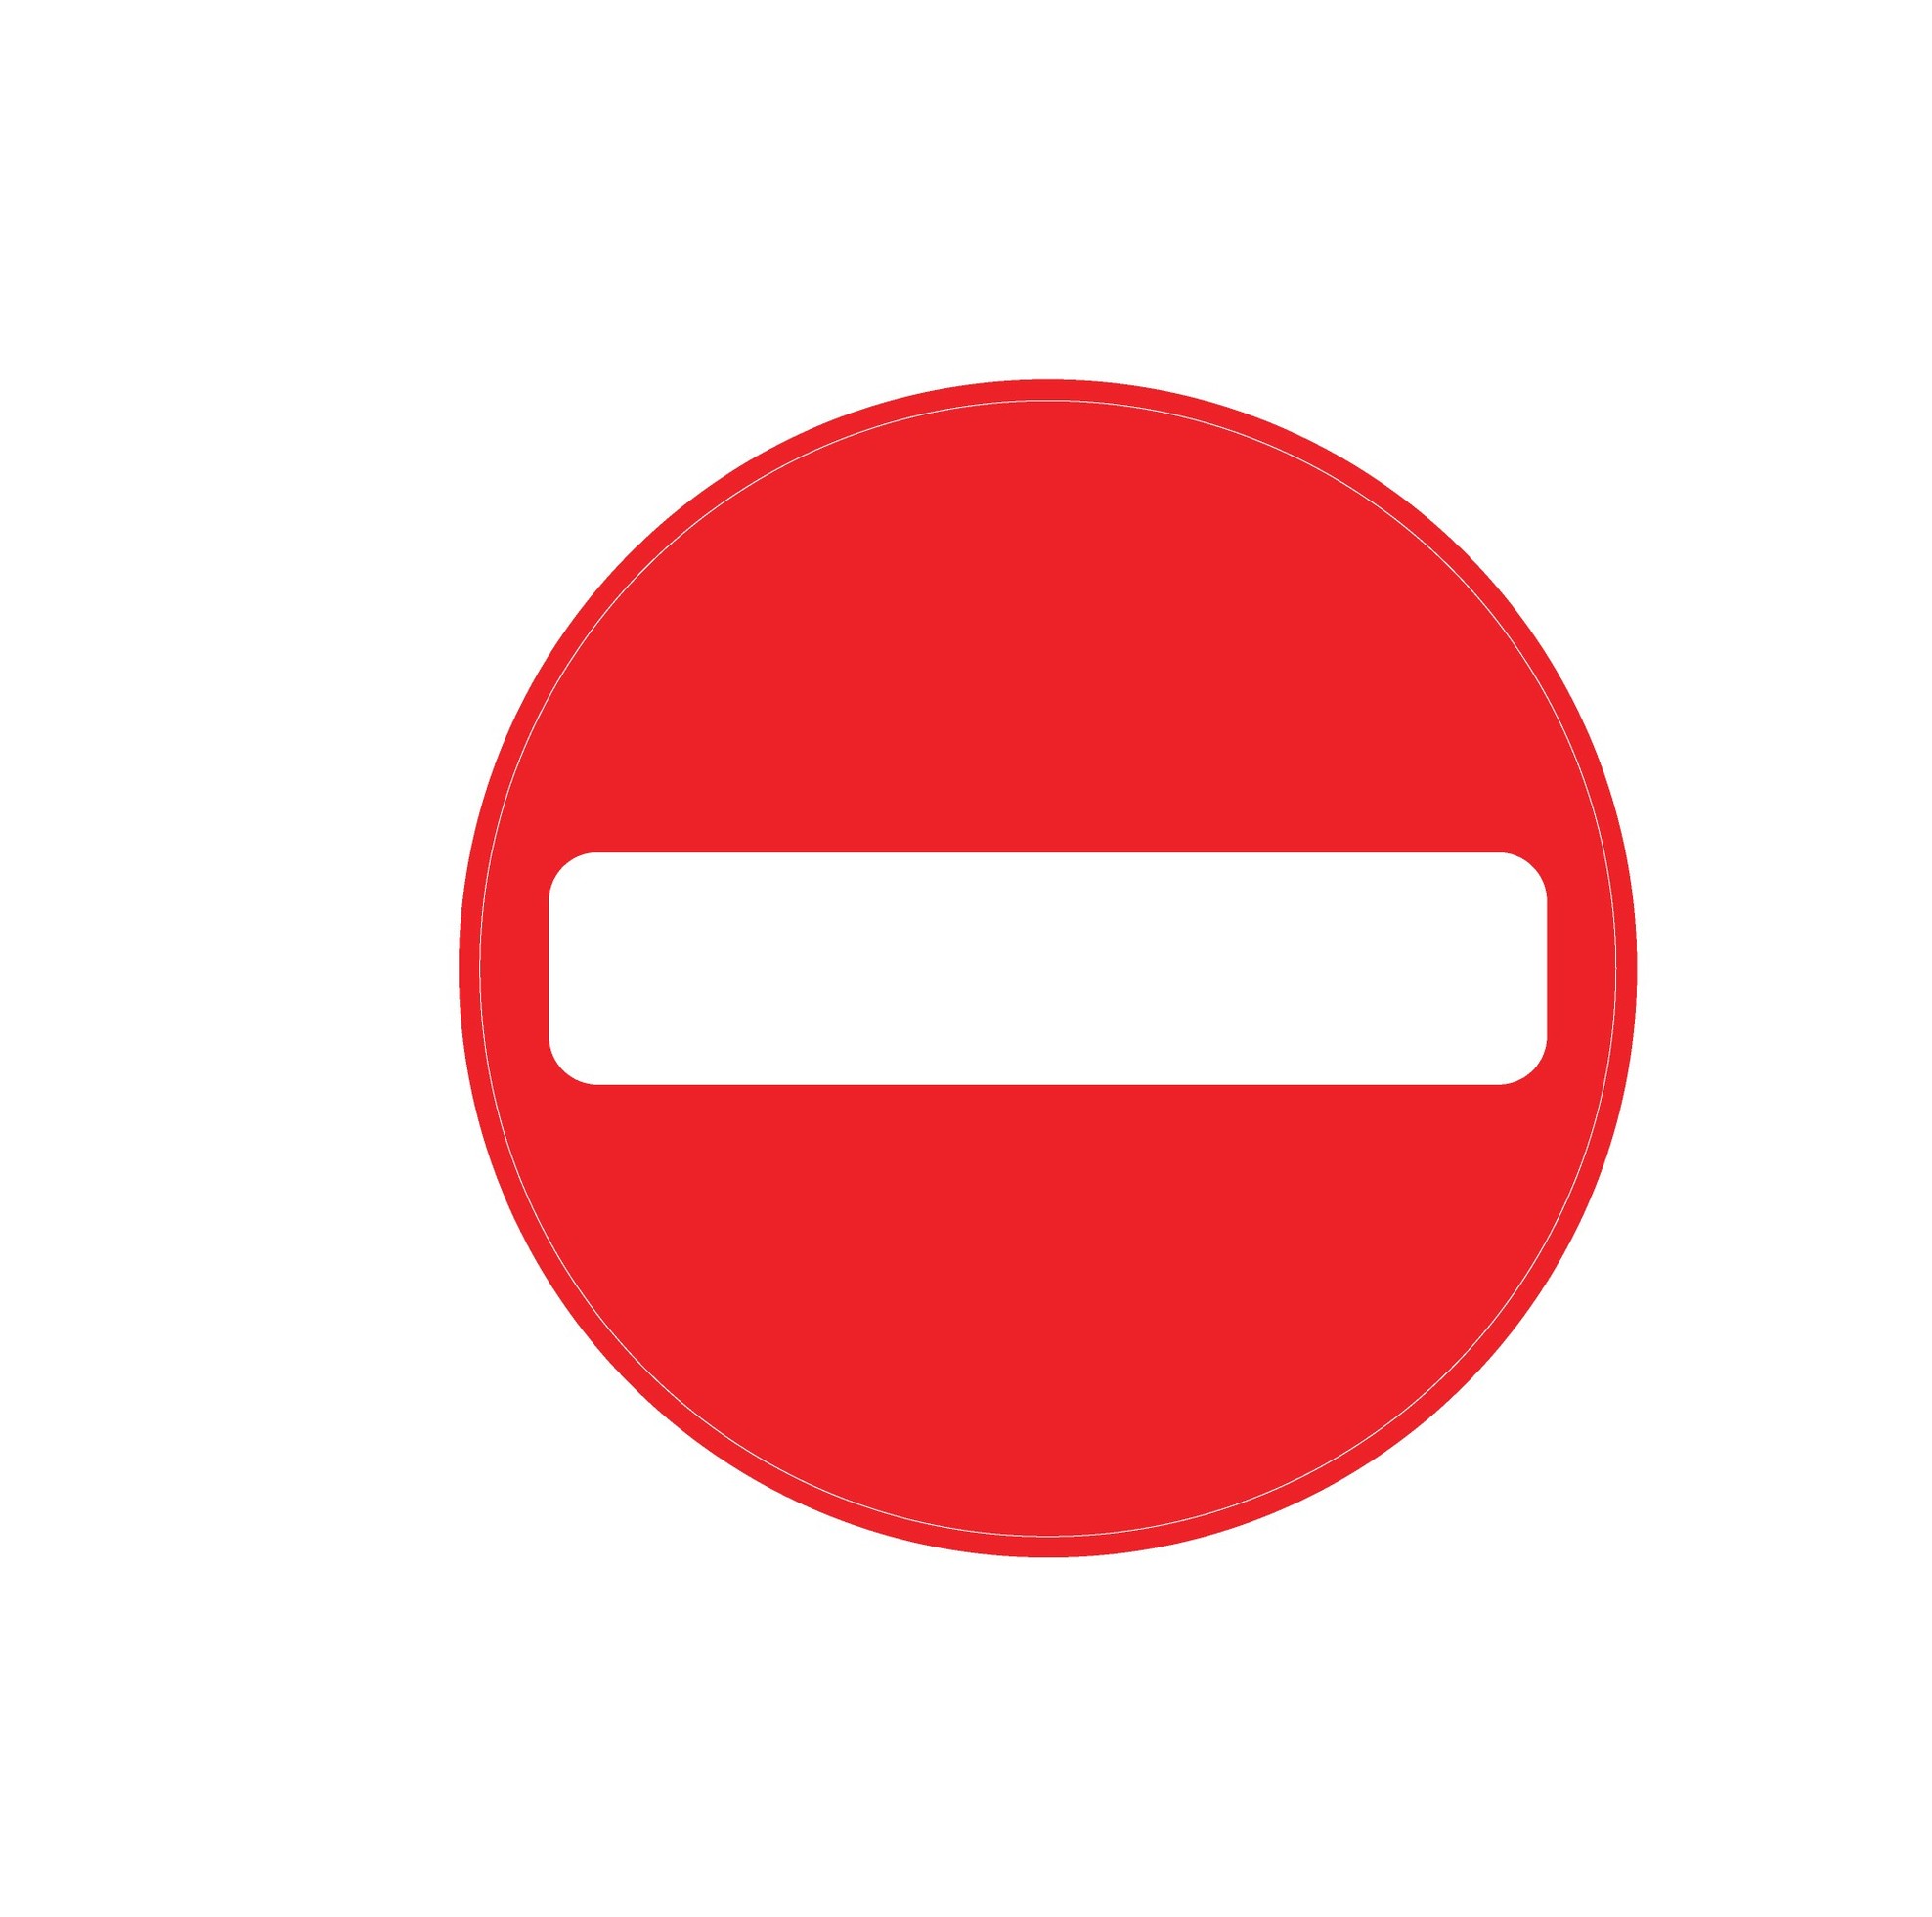 No Entry Signs Clipart - Free to use Clip Art Resource